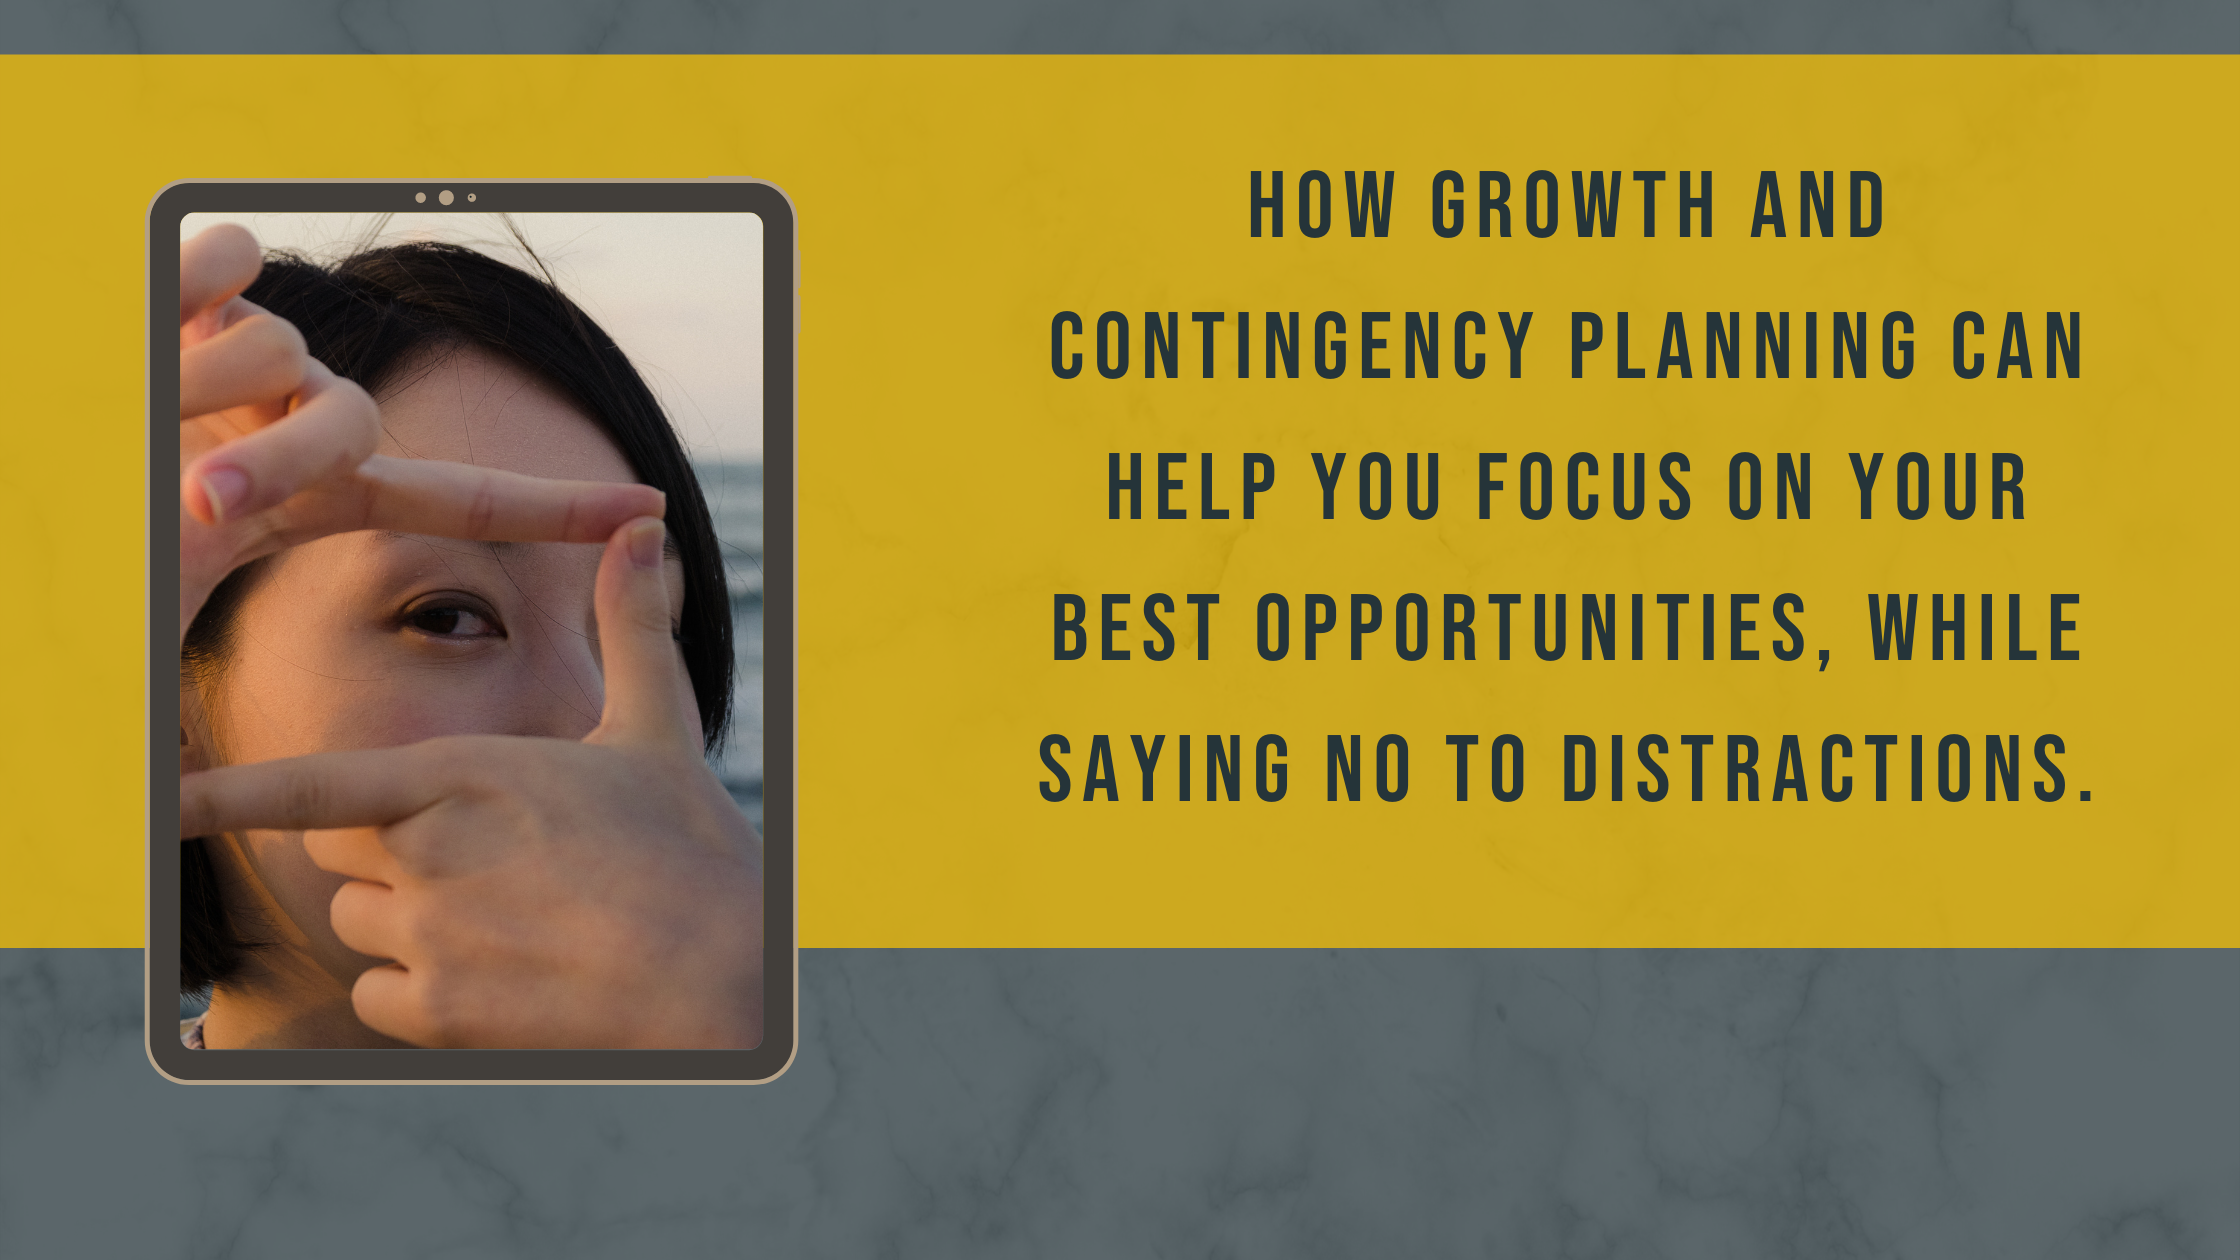 How Growth and Contingency Planning Can Help You Focus On Your Best Opportunities, While Saying No To Distractions.